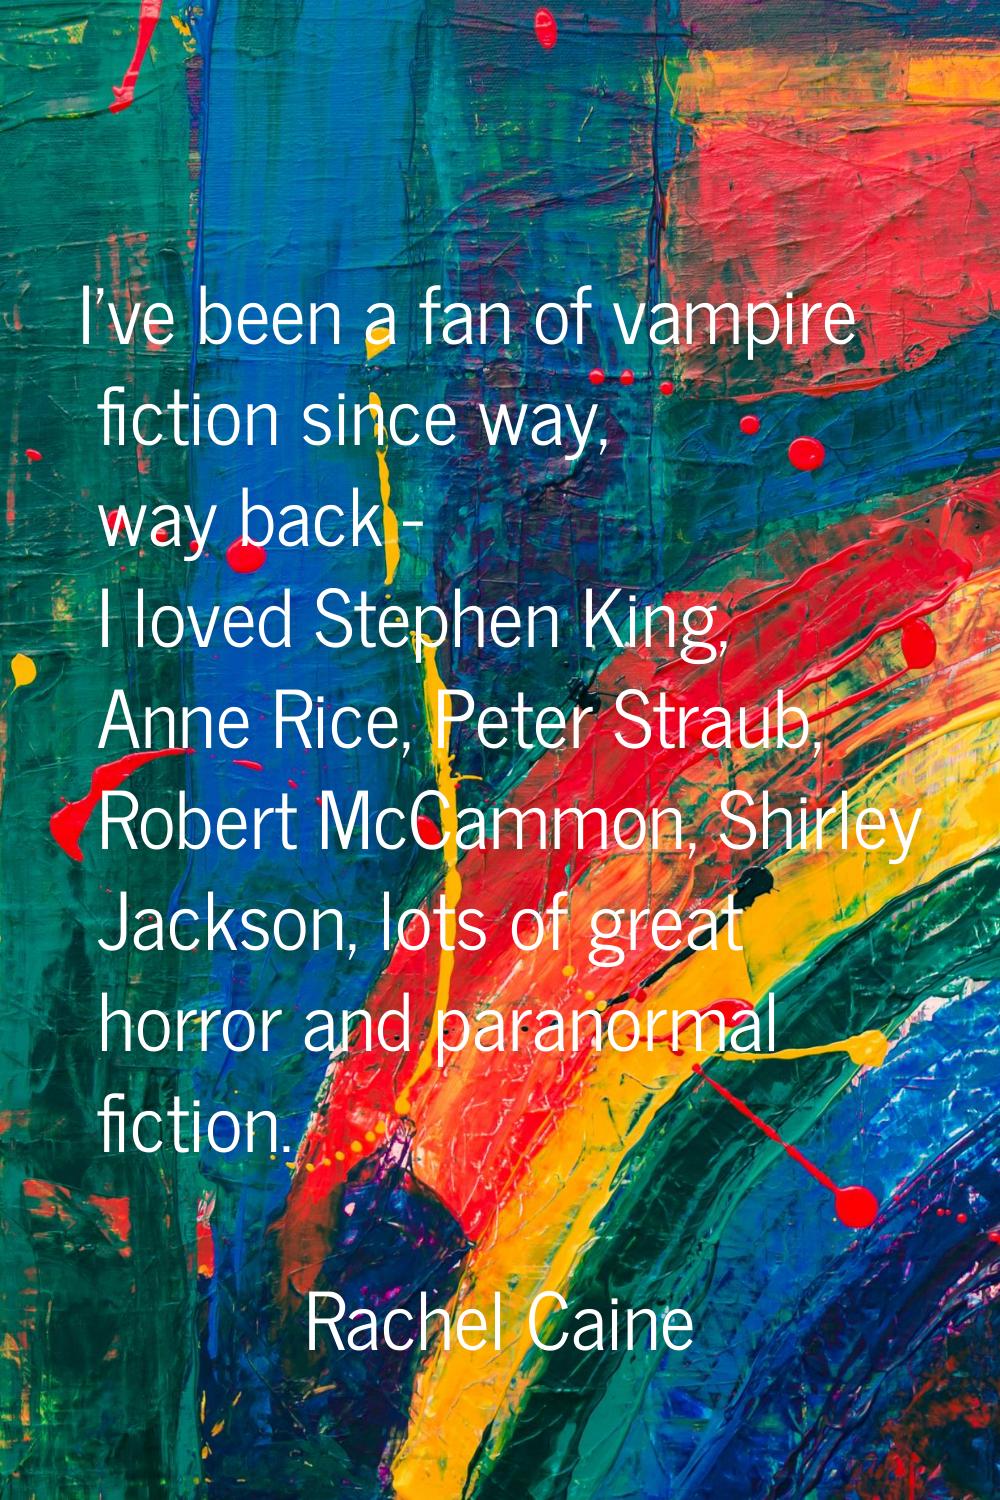 I've been a fan of vampire fiction since way, way back - I loved Stephen King, Anne Rice, Peter Str